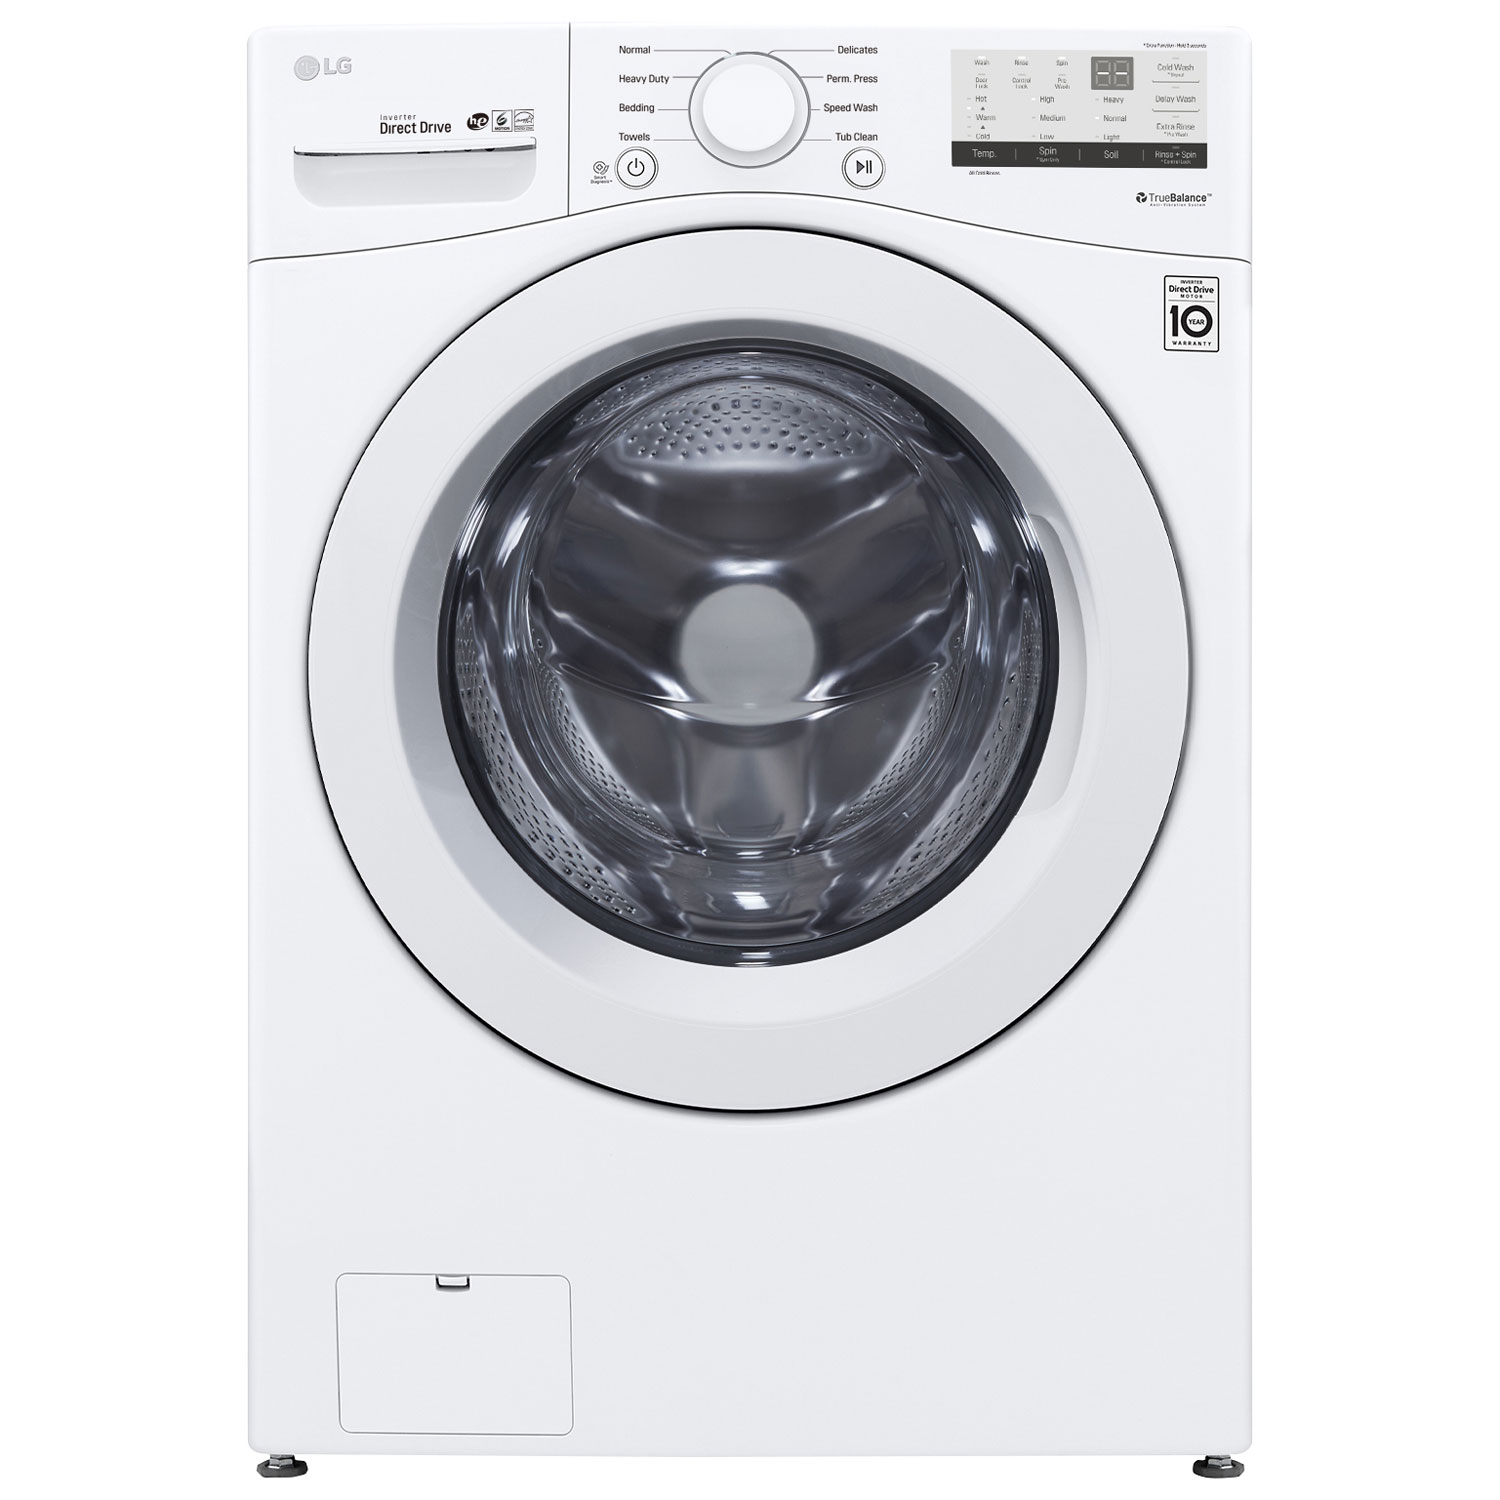 LG 5.2 Cu. Ft. High Efficiency Front Load Washer (WM3400CW) - White